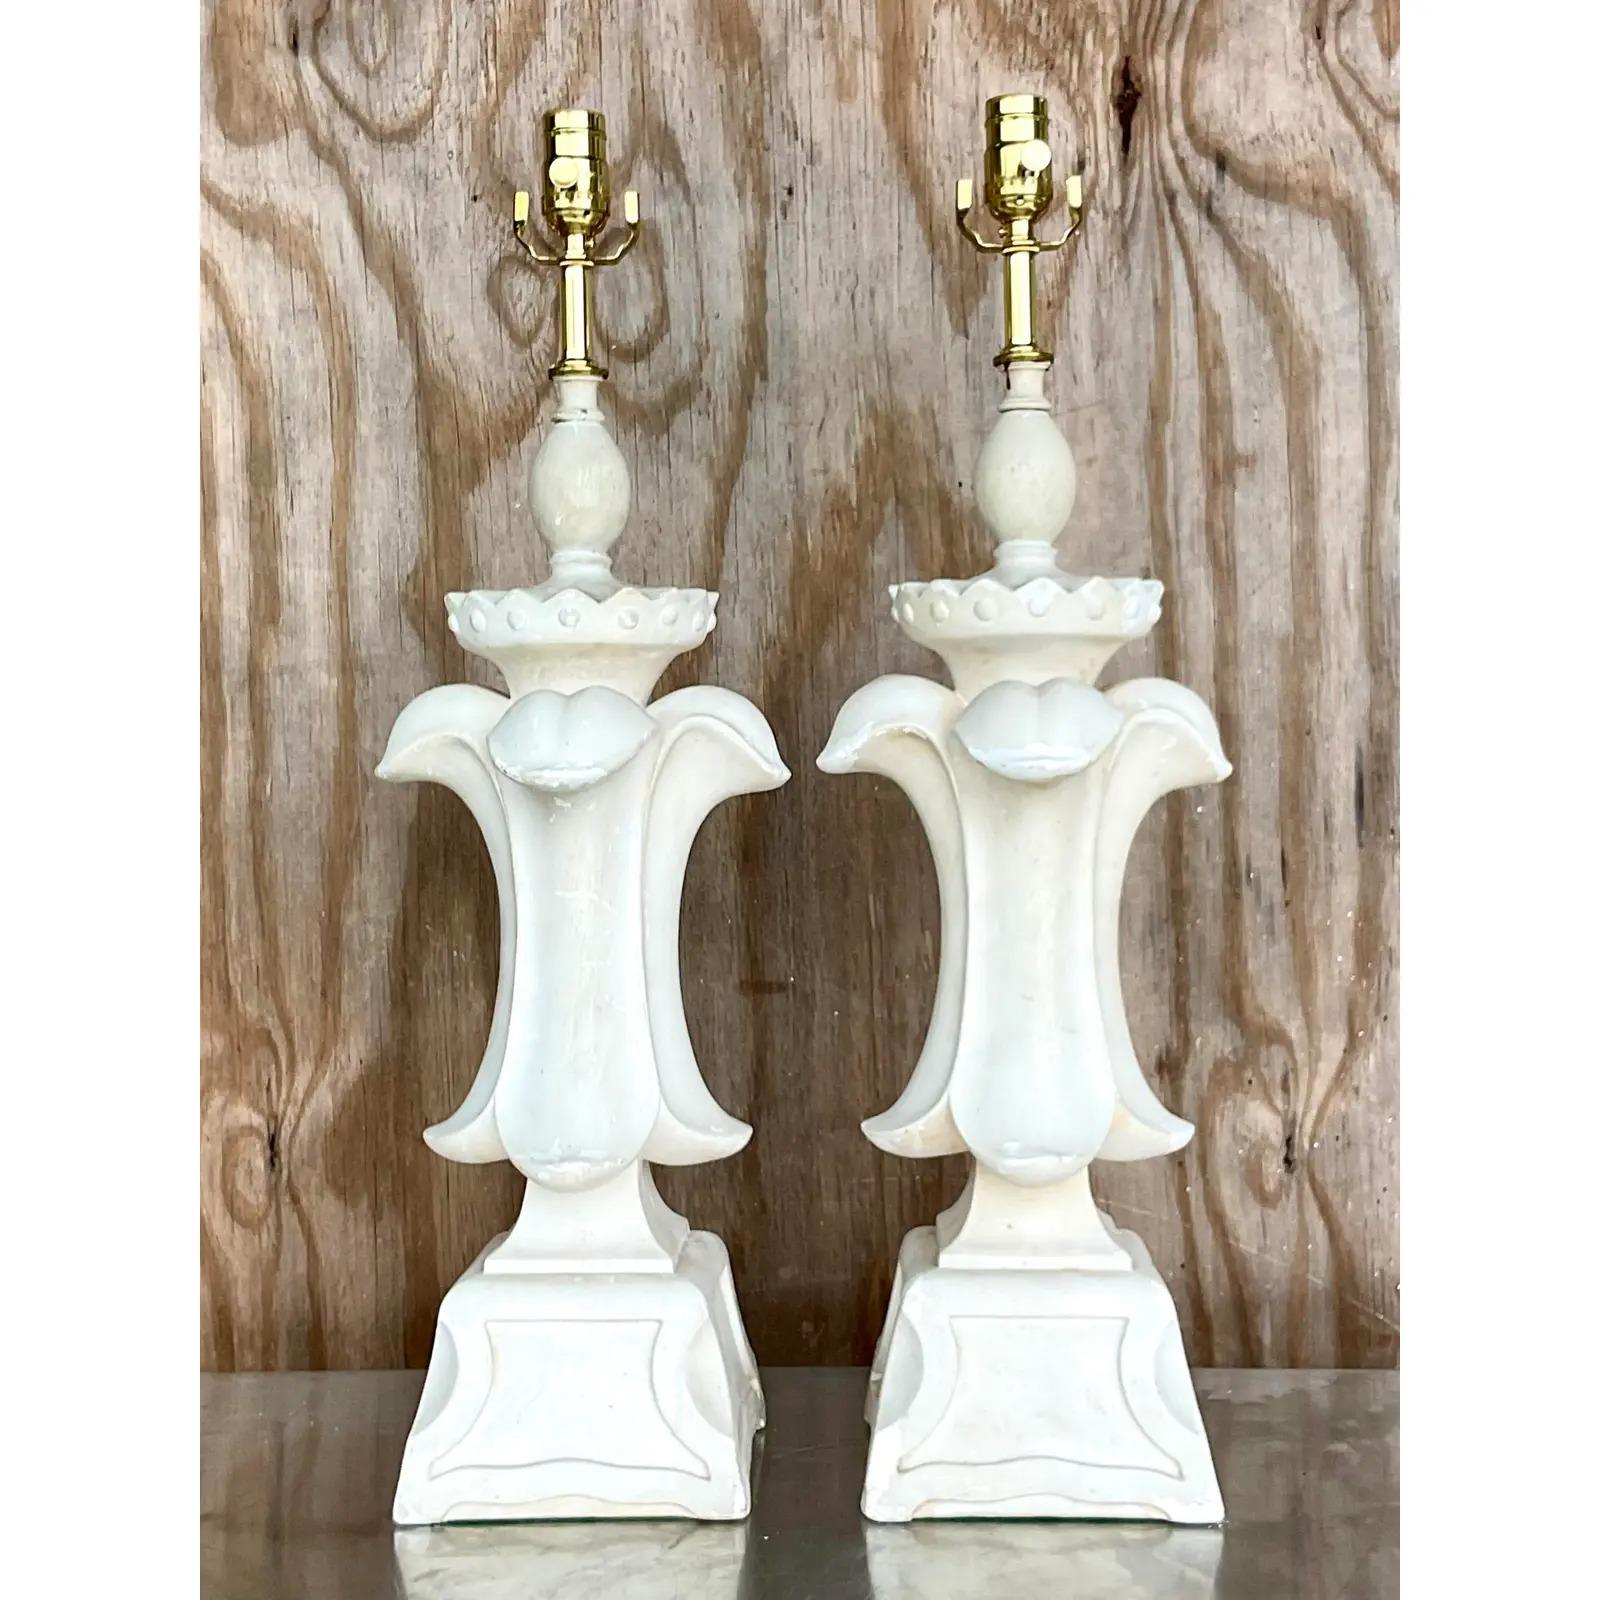 Gorgeous pair of vintage plaster table lamps. A classic fleur de lis design. All new wiring and hardware. The finish has all the patina of time with little areas of distress. I think it looks perfect with a little age on it. If you want a more